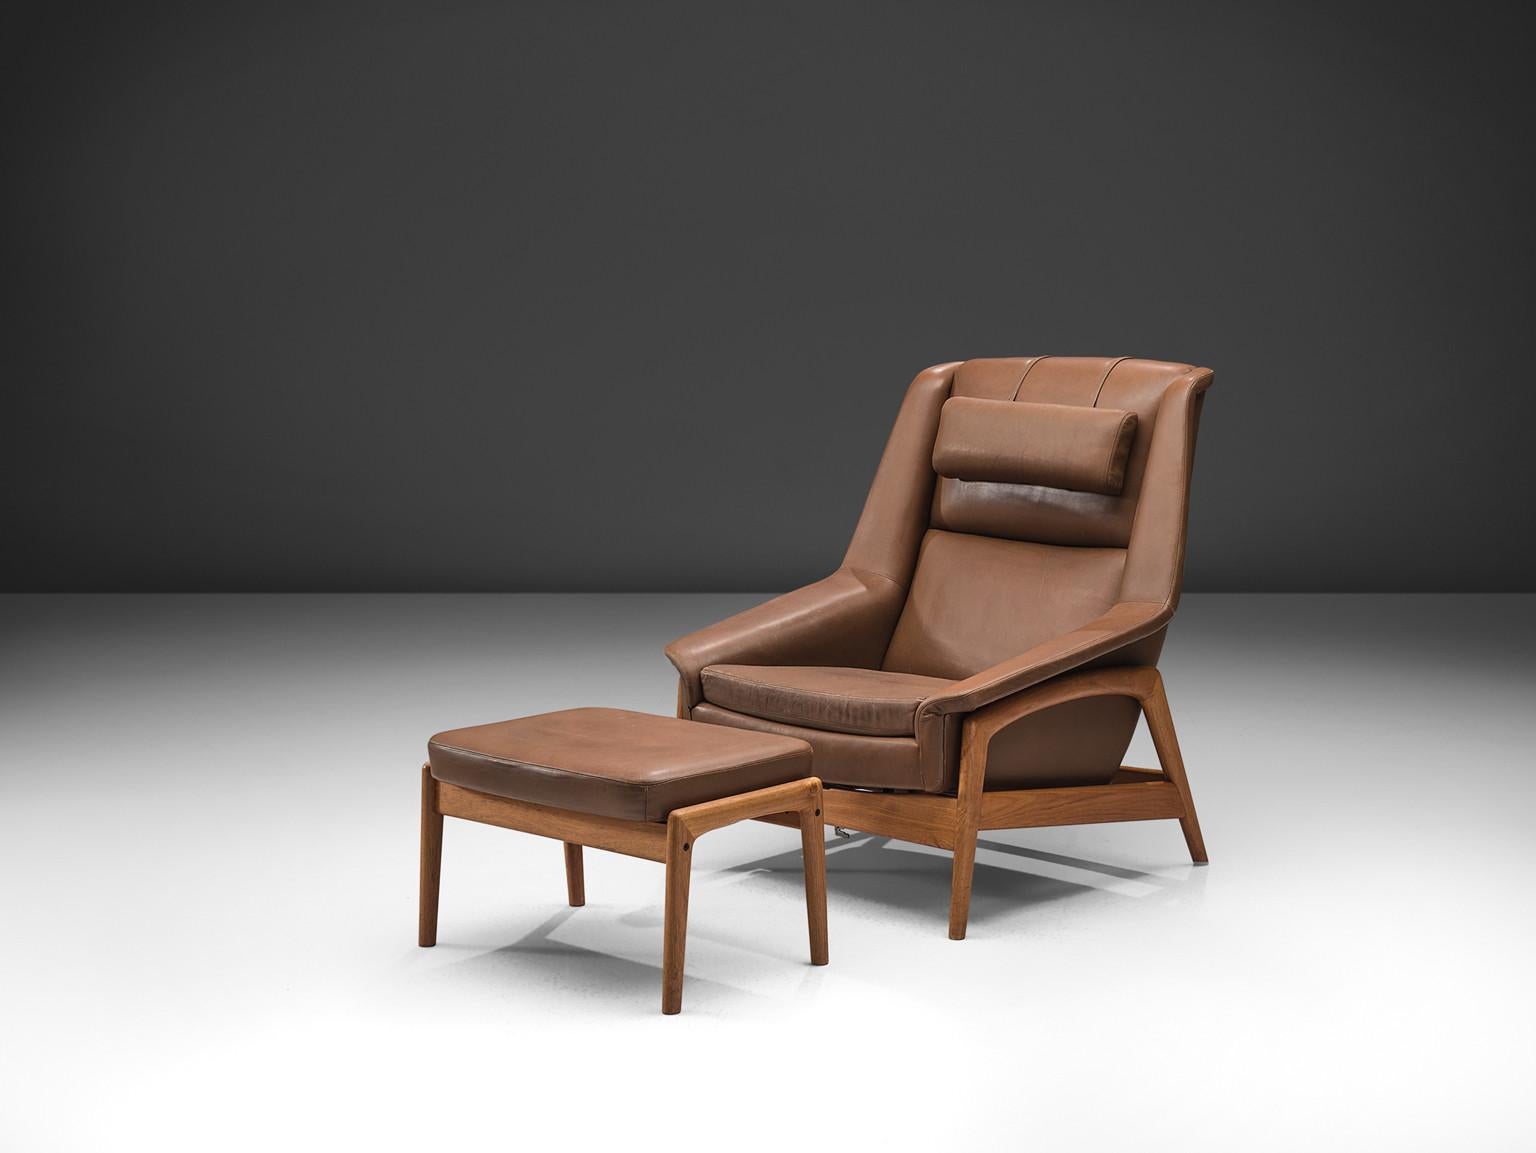 Folke Ohlsson for DUX, lounge chair, model 'Profil' with ottoman, leather, oak, Sweden, 1960s

Lovely lounge chair with ottoman, designed by Folke Ohlsson for DUX. On a bright oak wood frame surrounds the seating in brown leather upholstery.